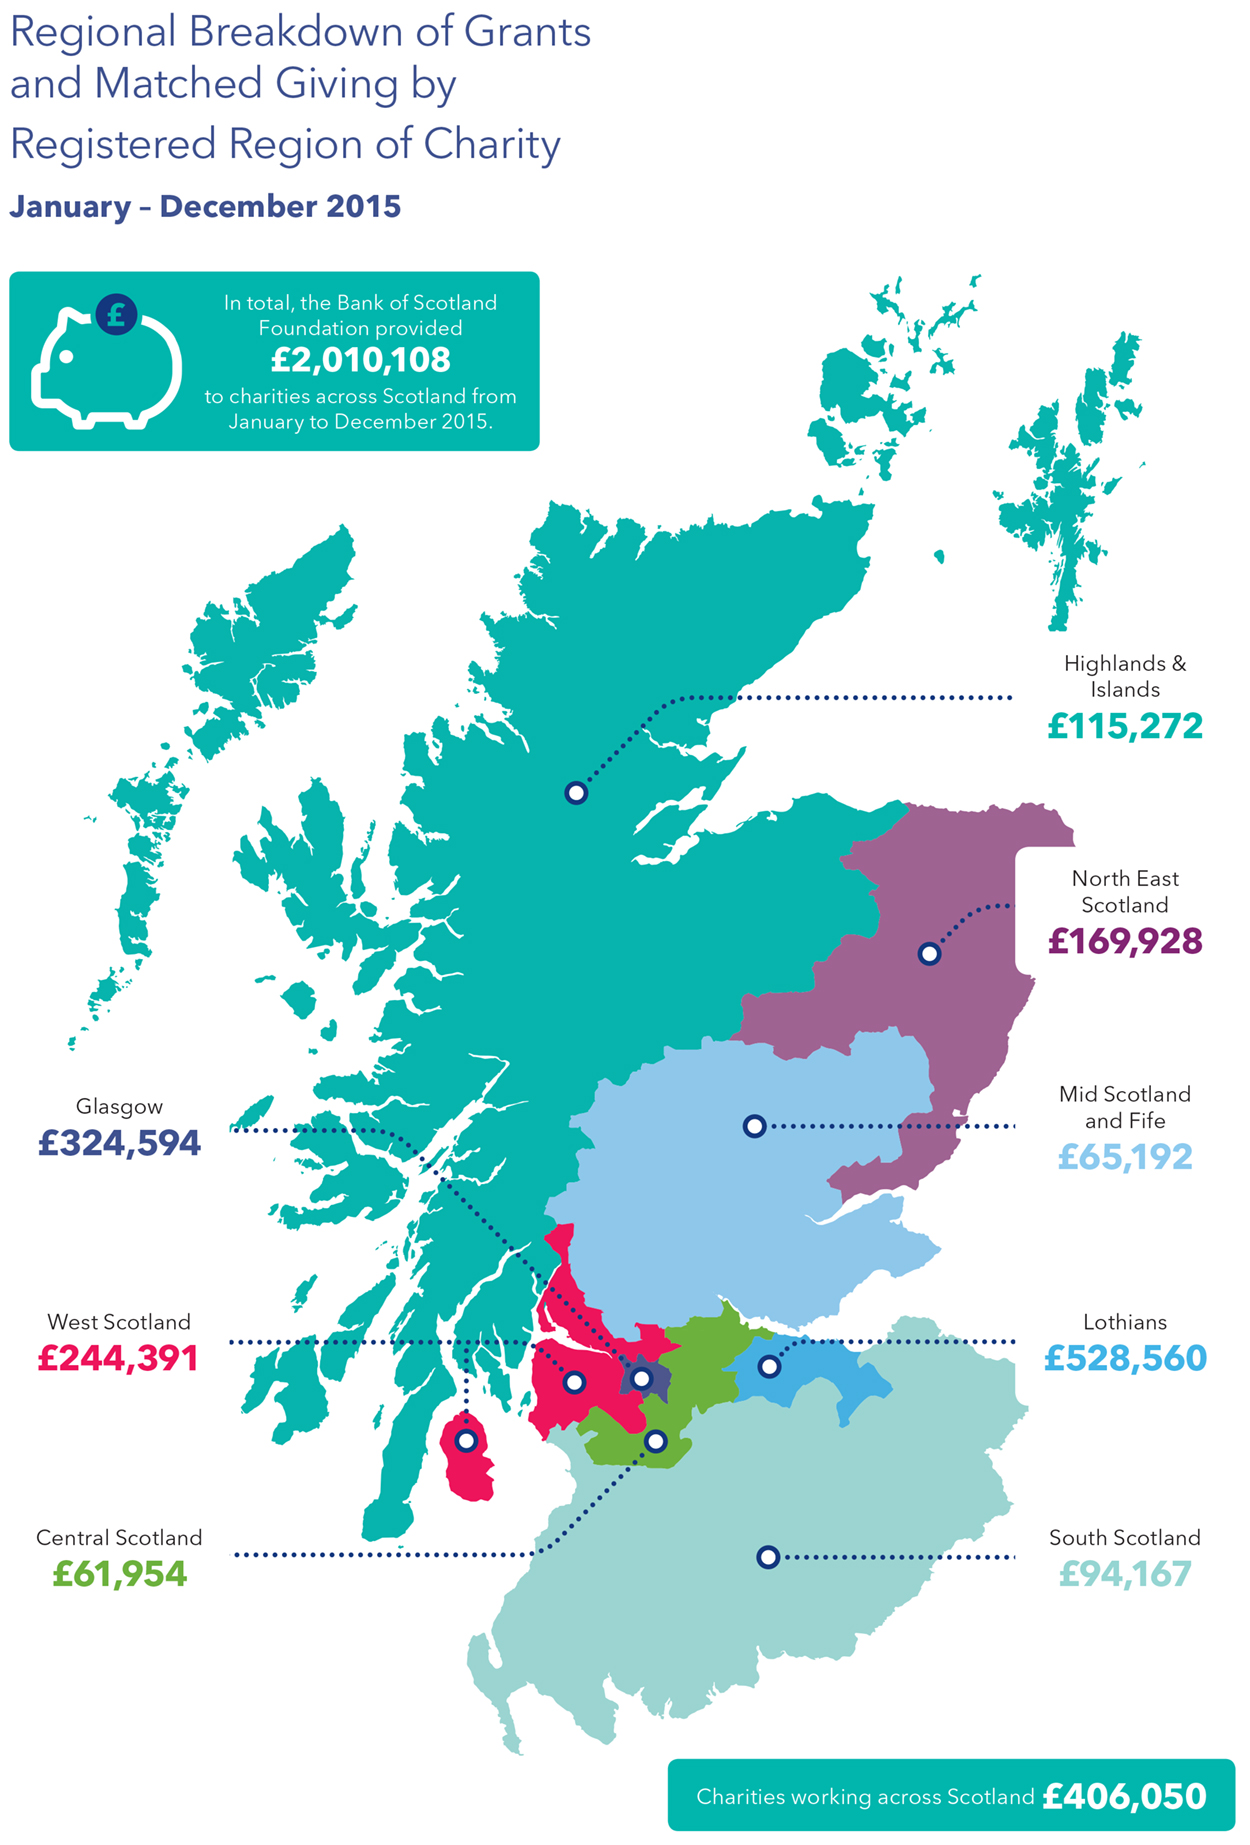 2015 Map showing charity work by region